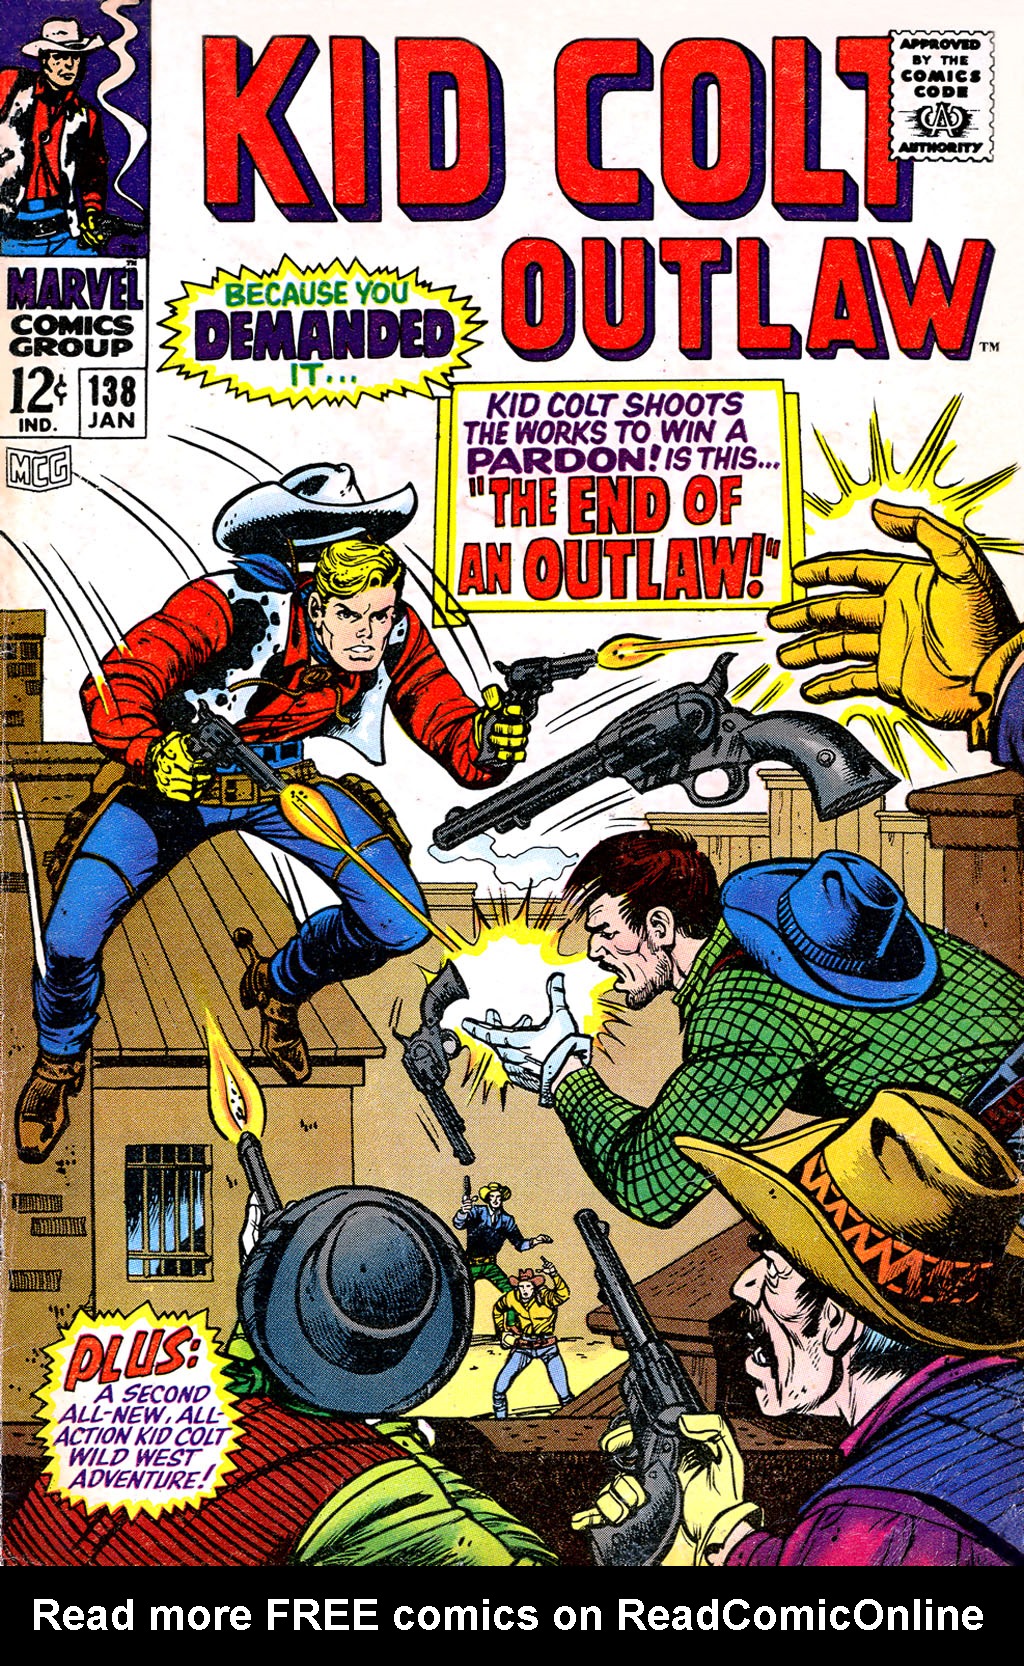 Read online Kid Colt Outlaw comic -  Issue #138 - 1